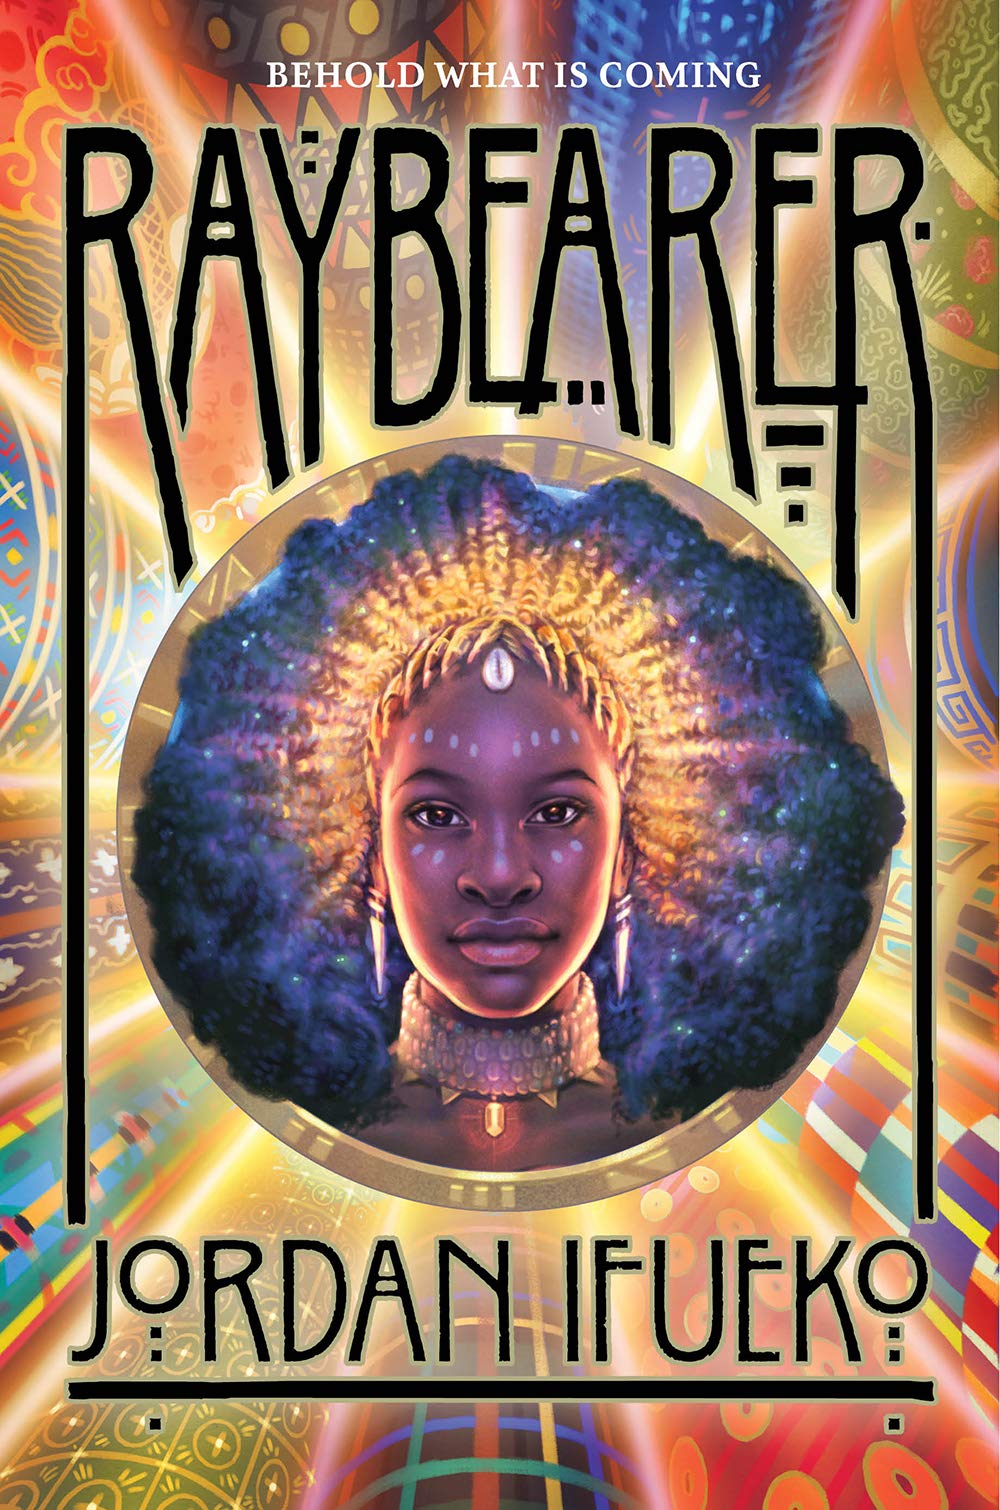 It's the cover of the book. At the very top of the image there's the title (Raybearer) in black while at the very bottom there's the author's name (Jordan Ifueko). The background is a pattern made up of different coloured rays (some gold, some red, some blue) whereas in the middle there is an image of a young black woman with her black hair fanned out around her. On her head she is wearing a golden tiara in the shape of rays that emanate out.